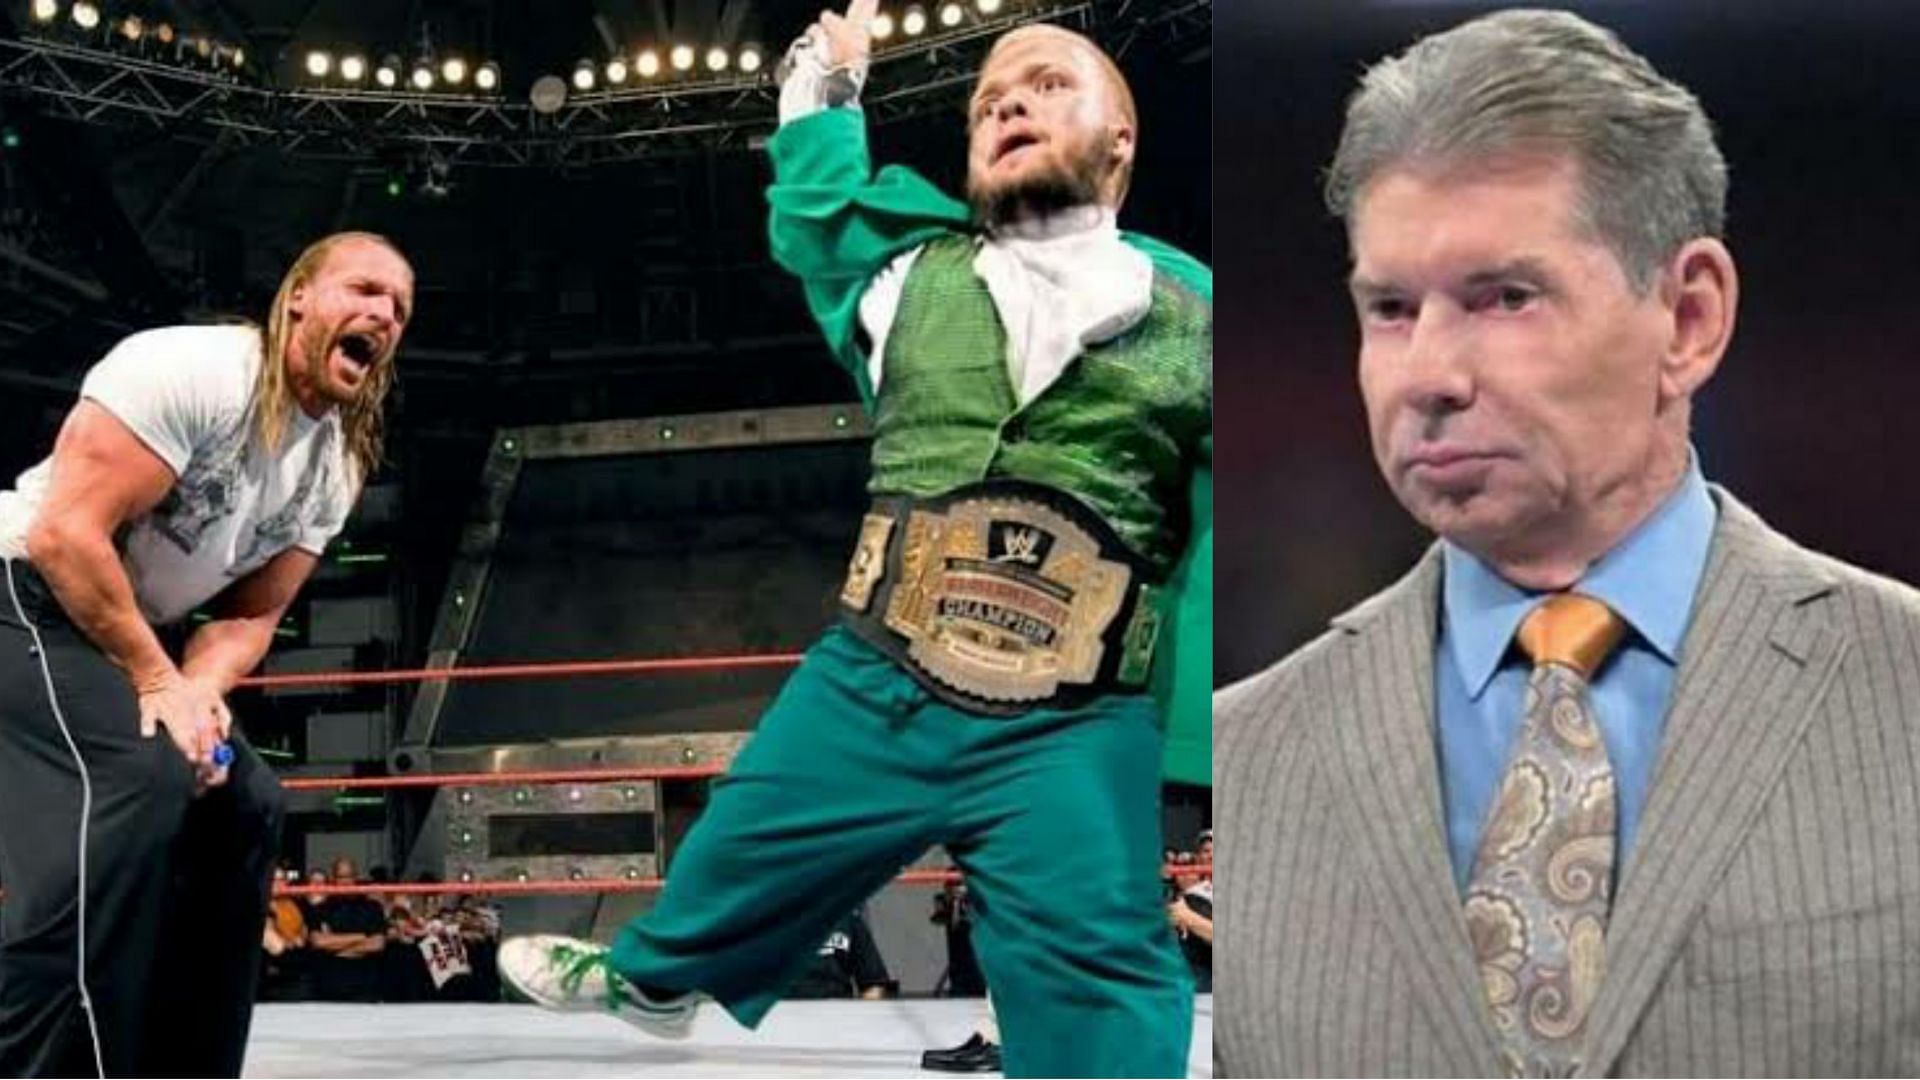 Vince McMahon had big plans for Mr. Kennedy in WWE.